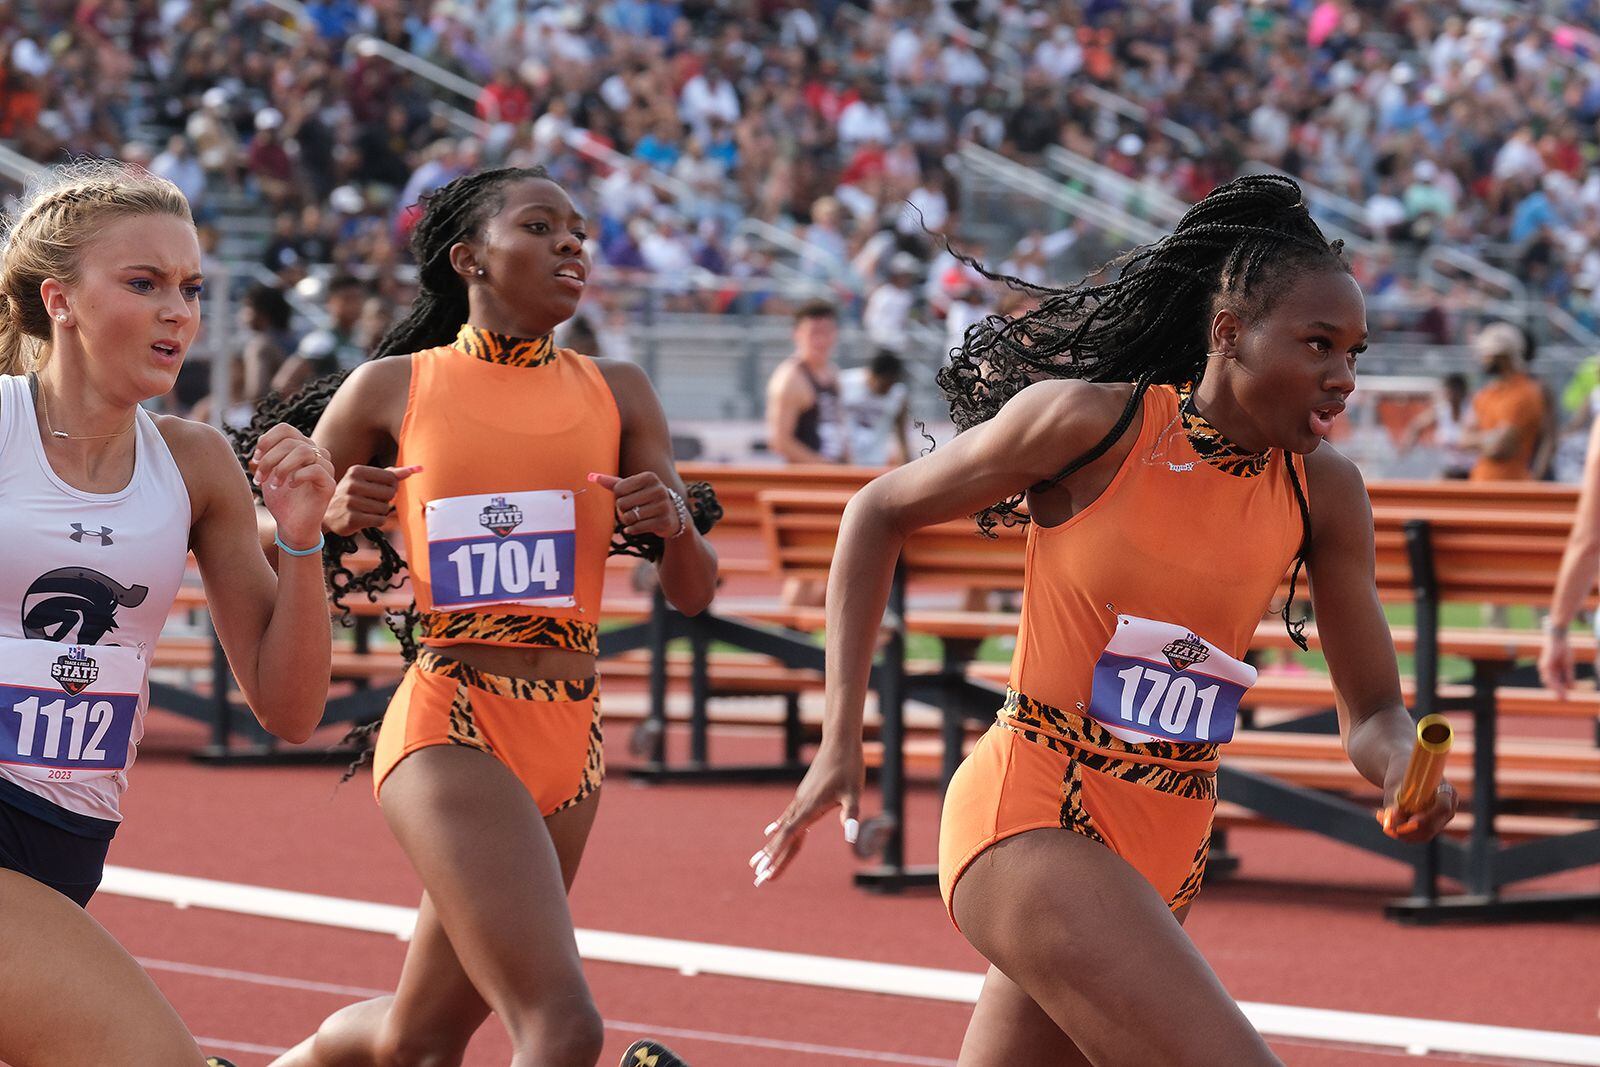 See photos from Day 2 of the UIL state track meet